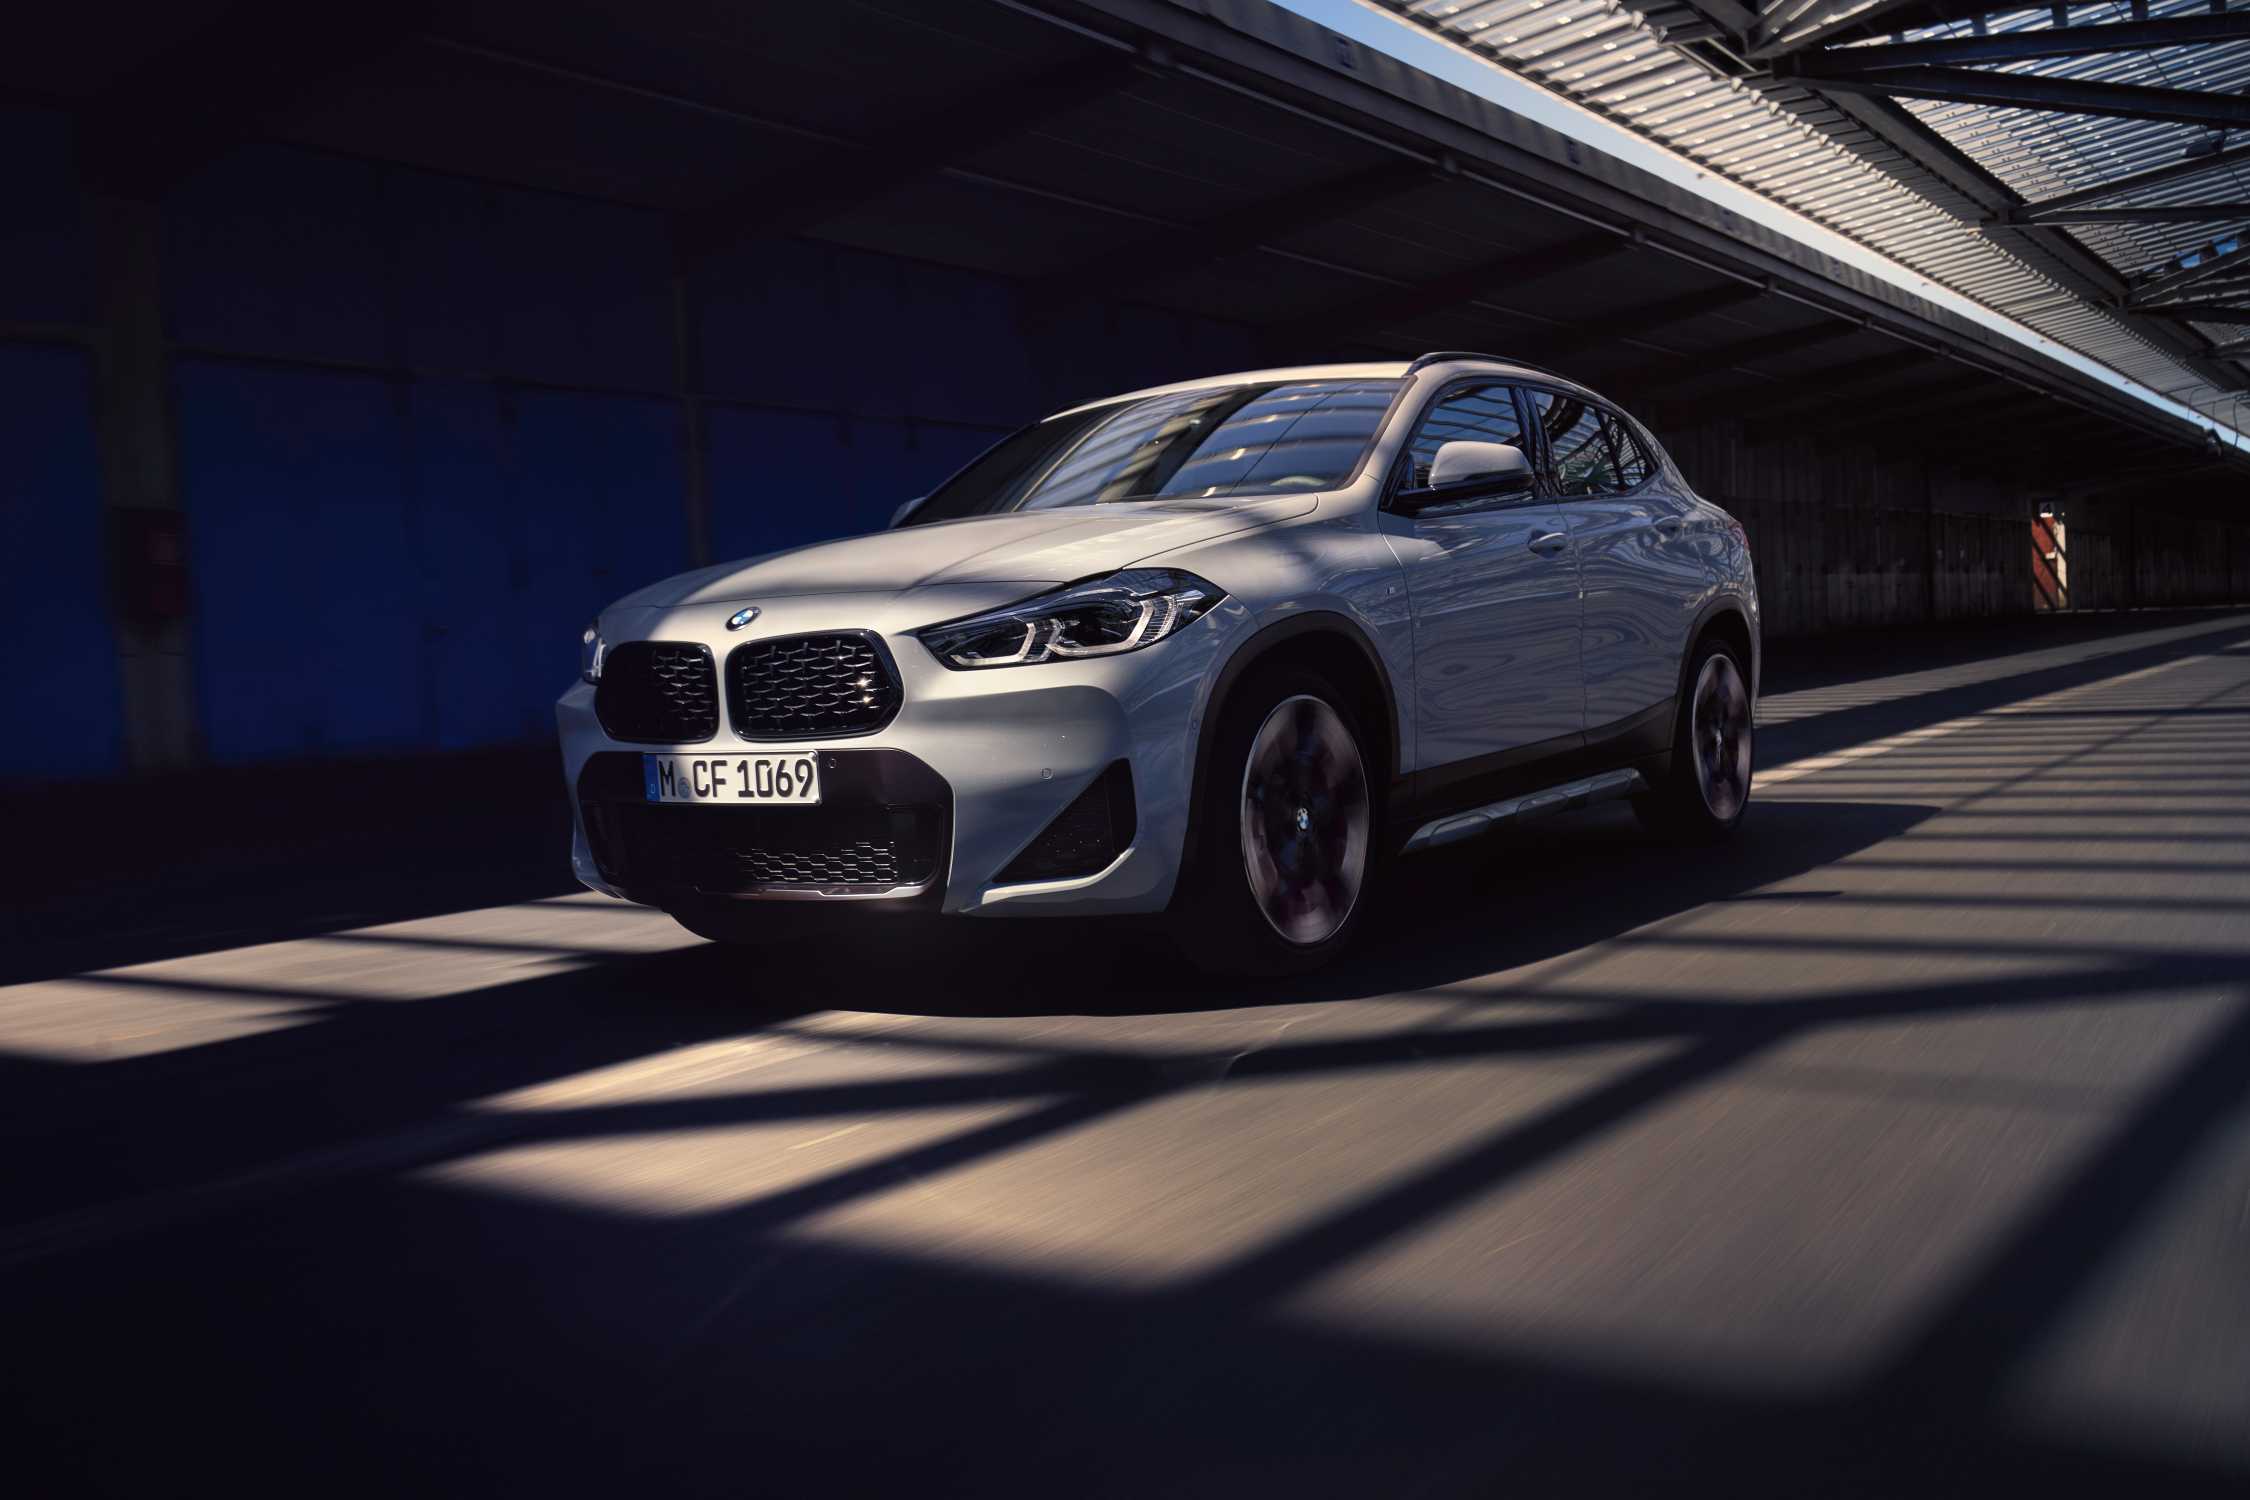 2021 BMW X2 Edition M Mesh Offers Lots of Style, Little Substance